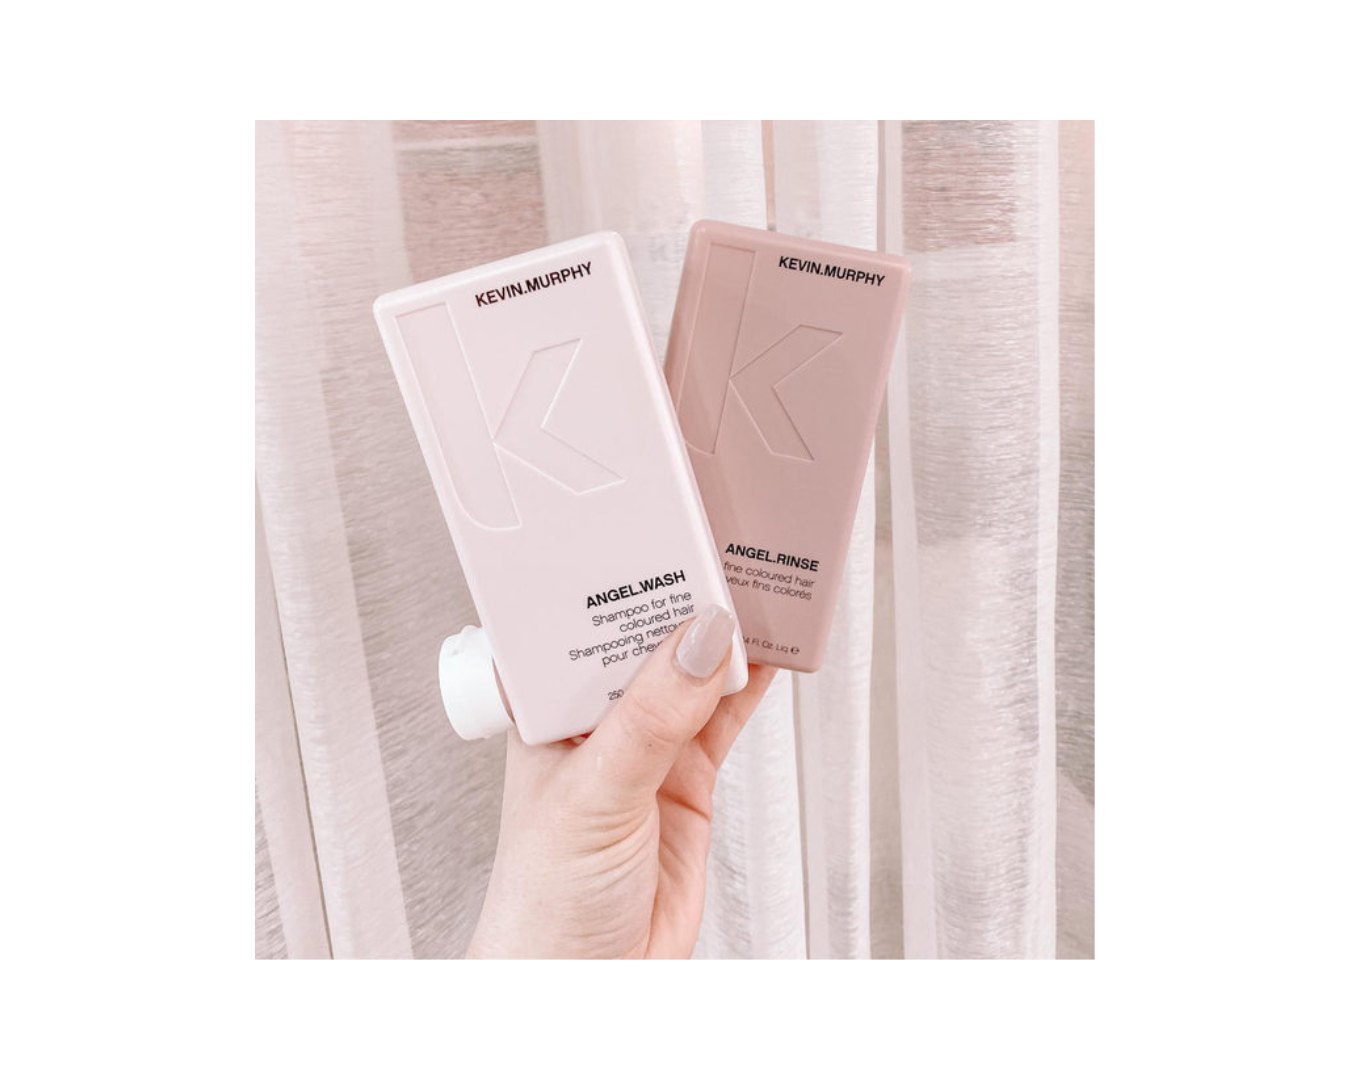 KEVIN MURPHY - Angel Wash (8 – Beauty and sup